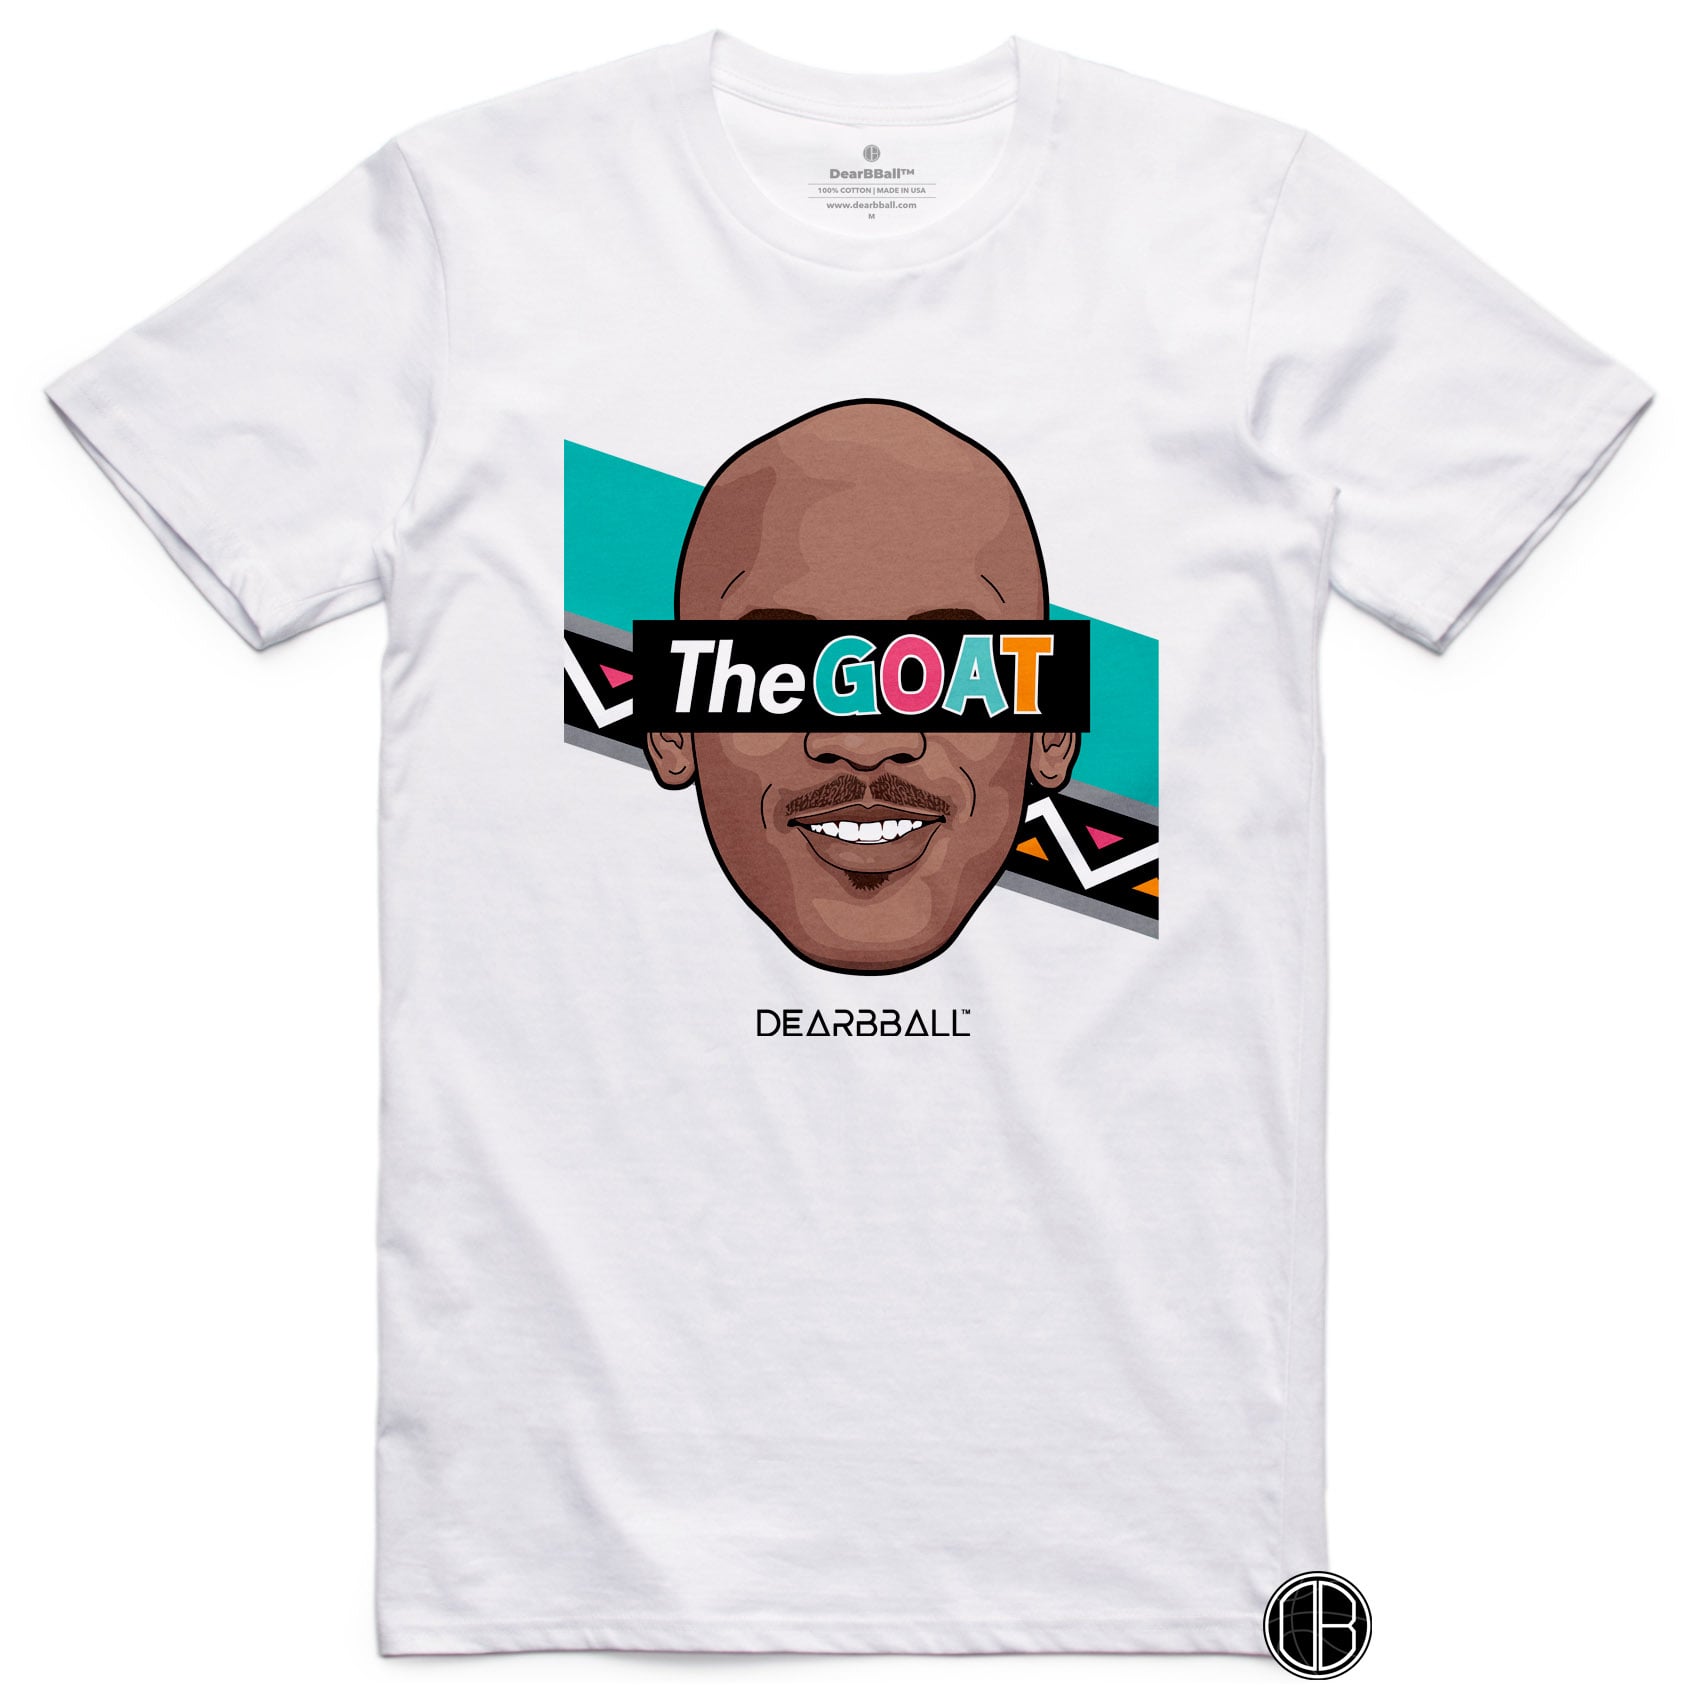 Camiseta DearBBall-TheGOAT 1996 All Star Game Edition